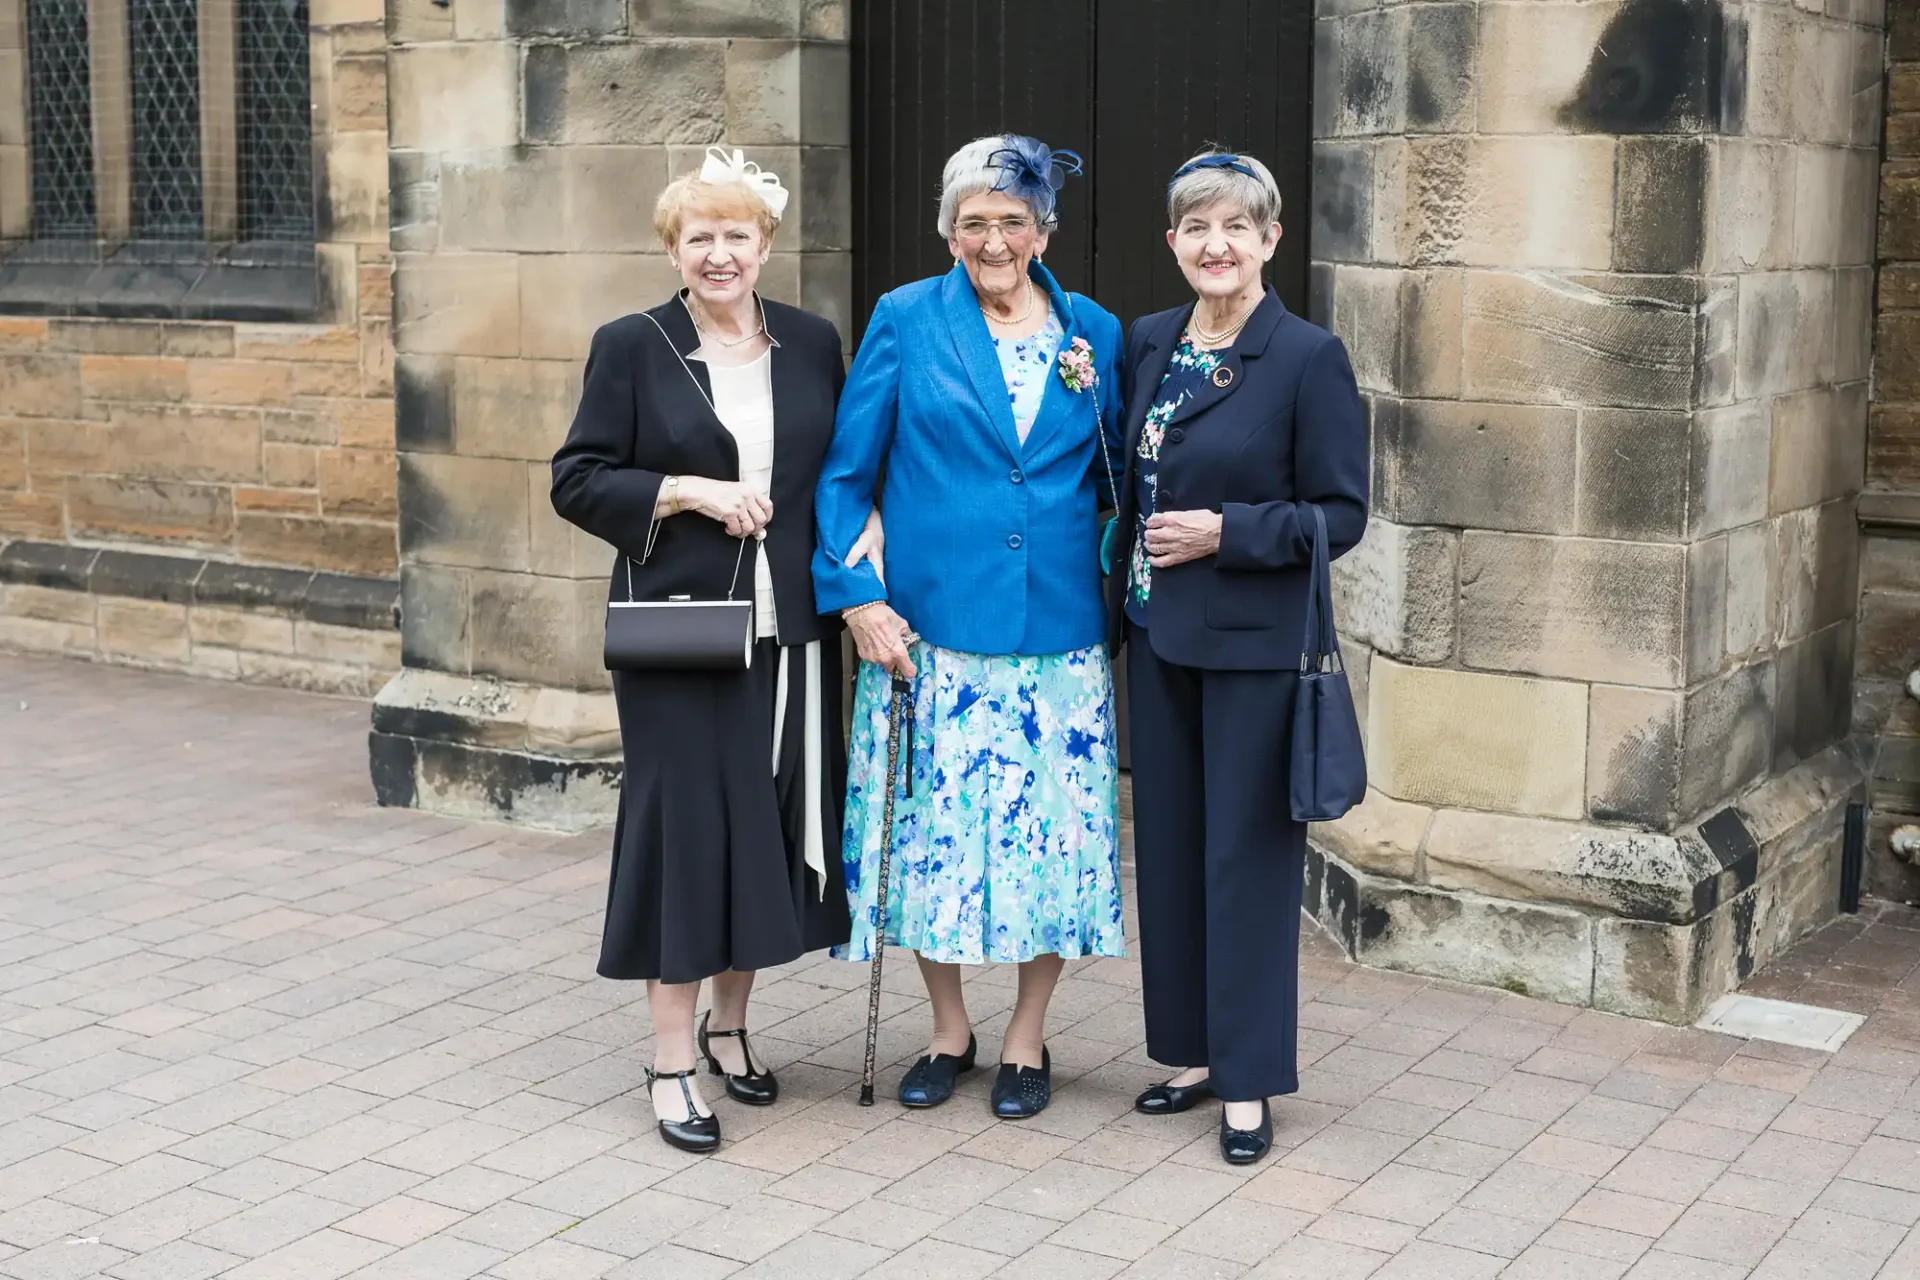 Three elderly women smiling and standing together outside a stone building, dressed in formal attire with floral accents.